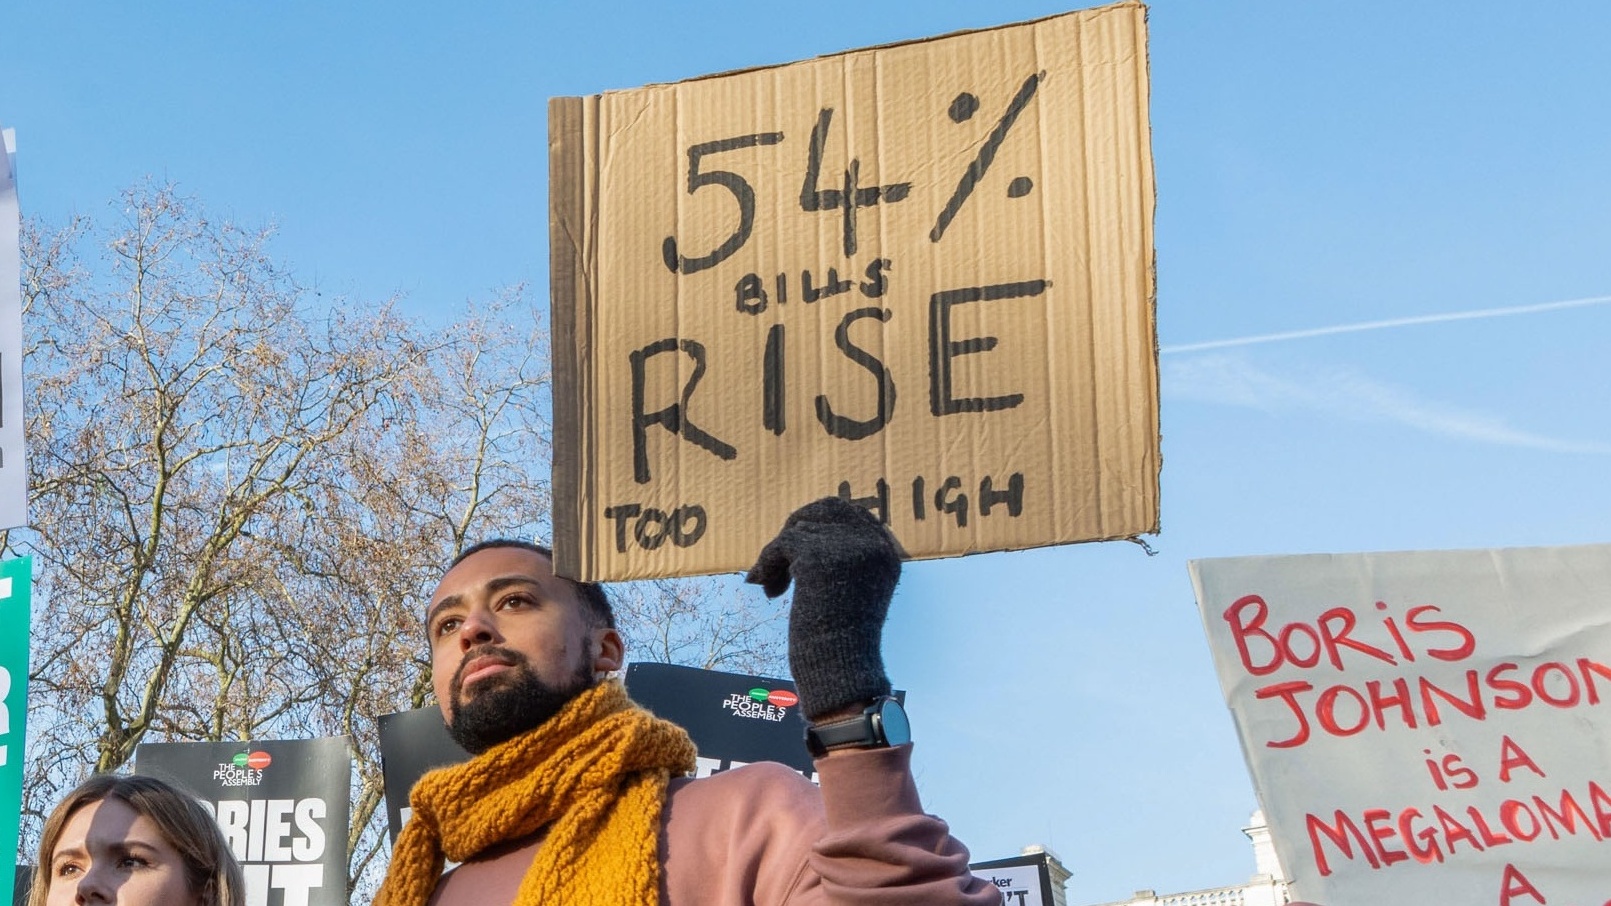 Cost-of-living crisis protester